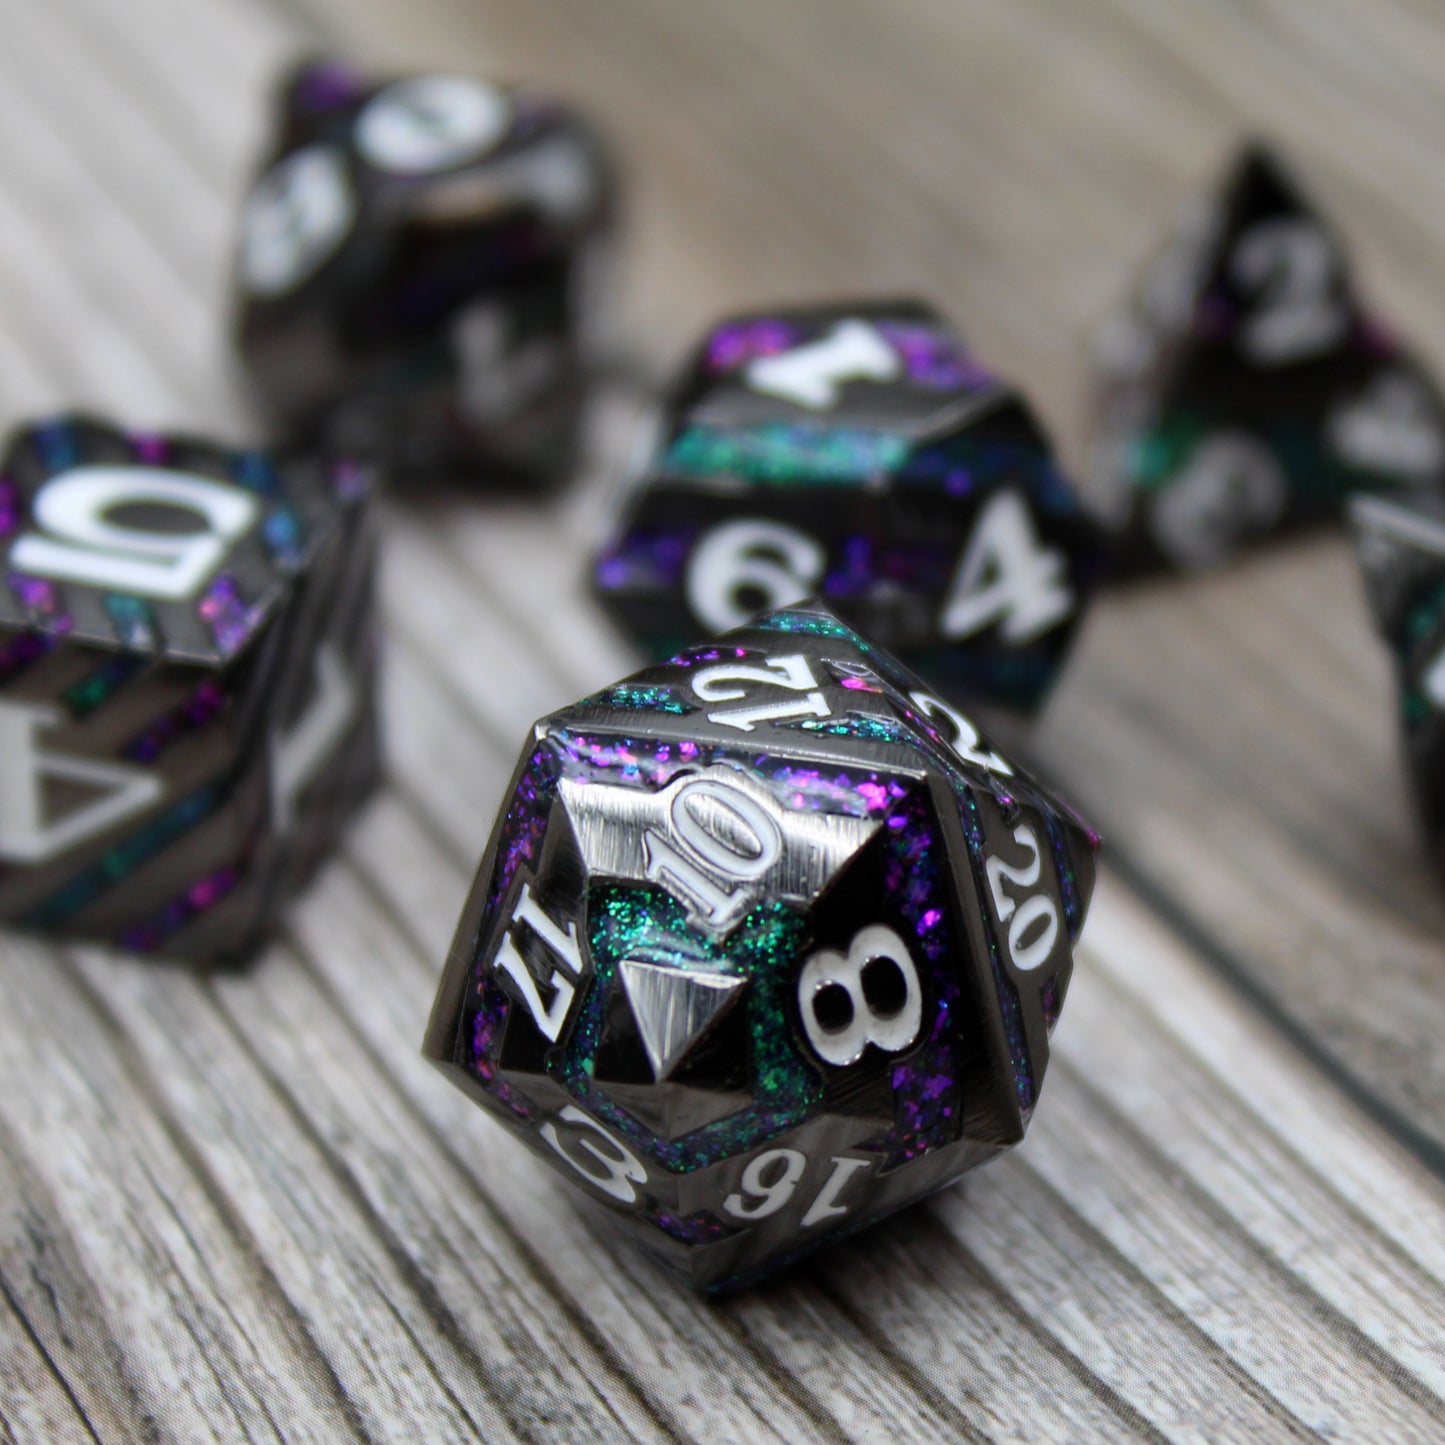 Black, Purple, and Green stripped dice set